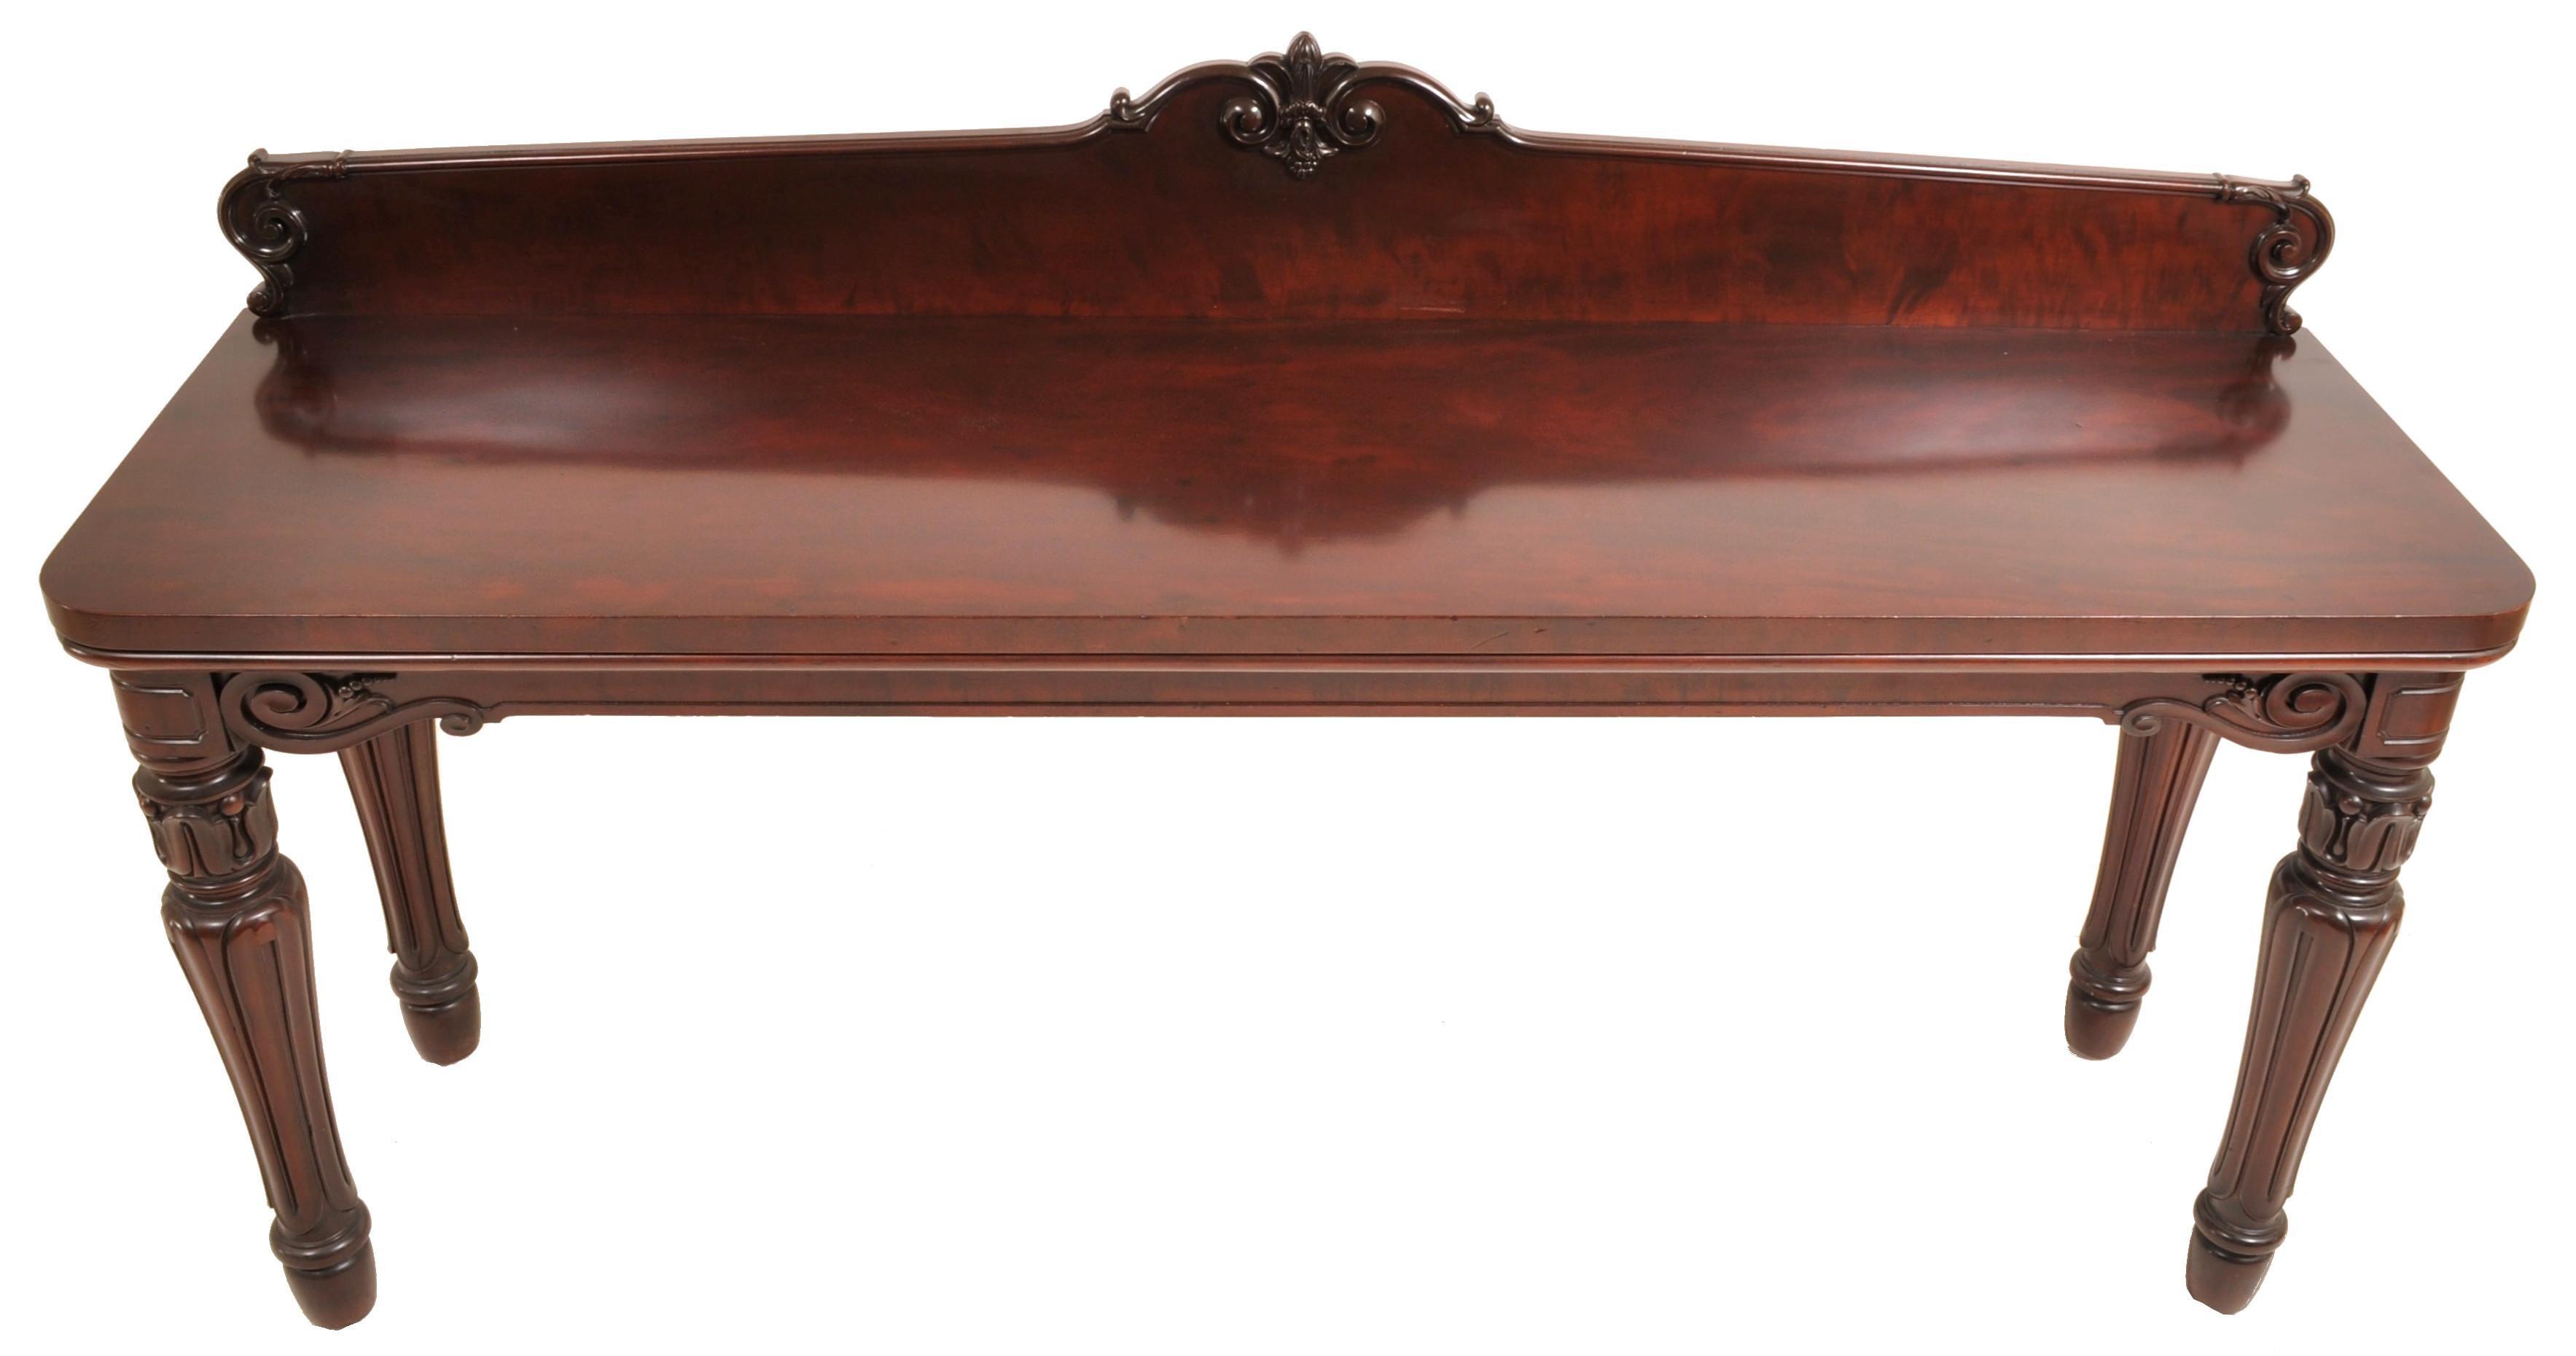 Rare and unusual antique American Empire mahogany sideboard or server from J.D. Rockefeller's Residence, NY, circa 1835. The server having a carved gallery to the back, the base having corresponding carving to the skirt. The server standing on four